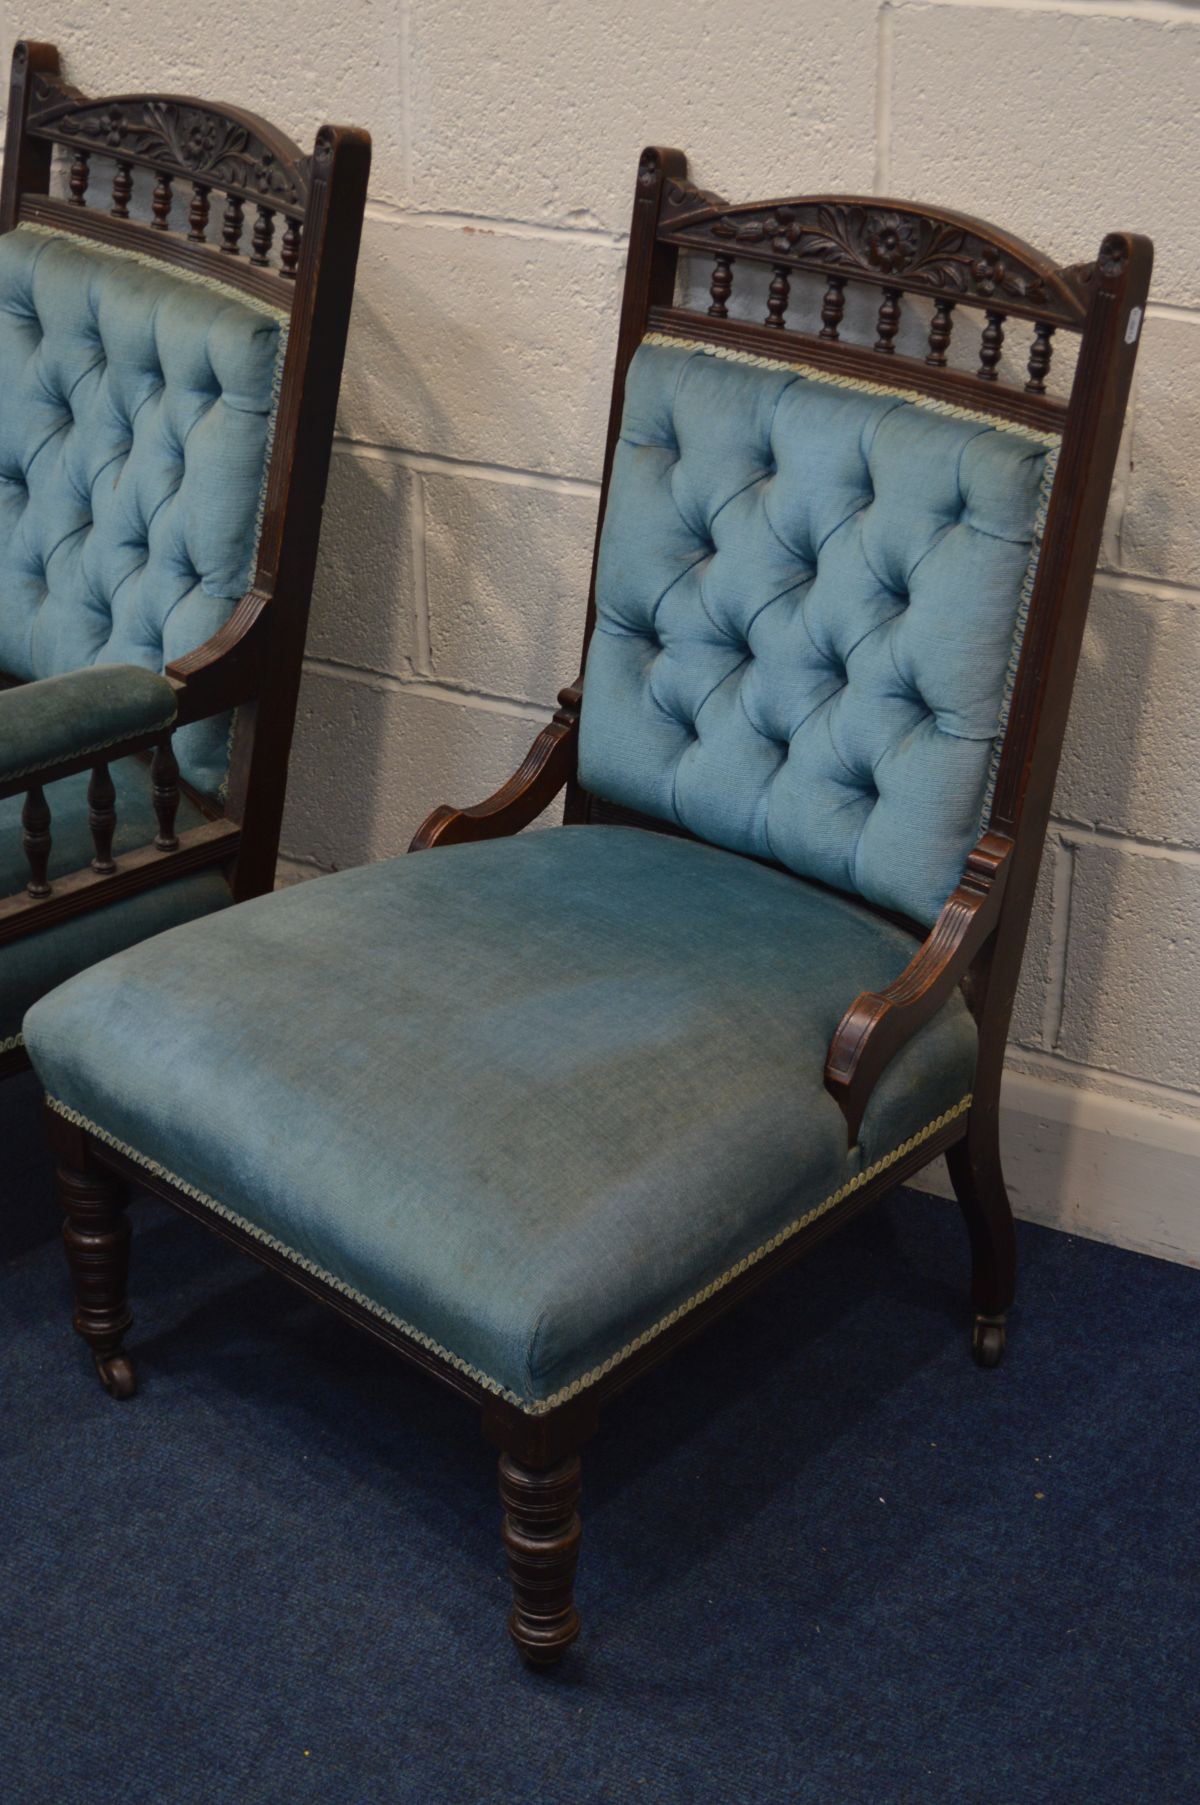 A PAIR OF EDWARDIAN MAHOGANY LADIES AND GENTS CHAIRS - Image 2 of 3